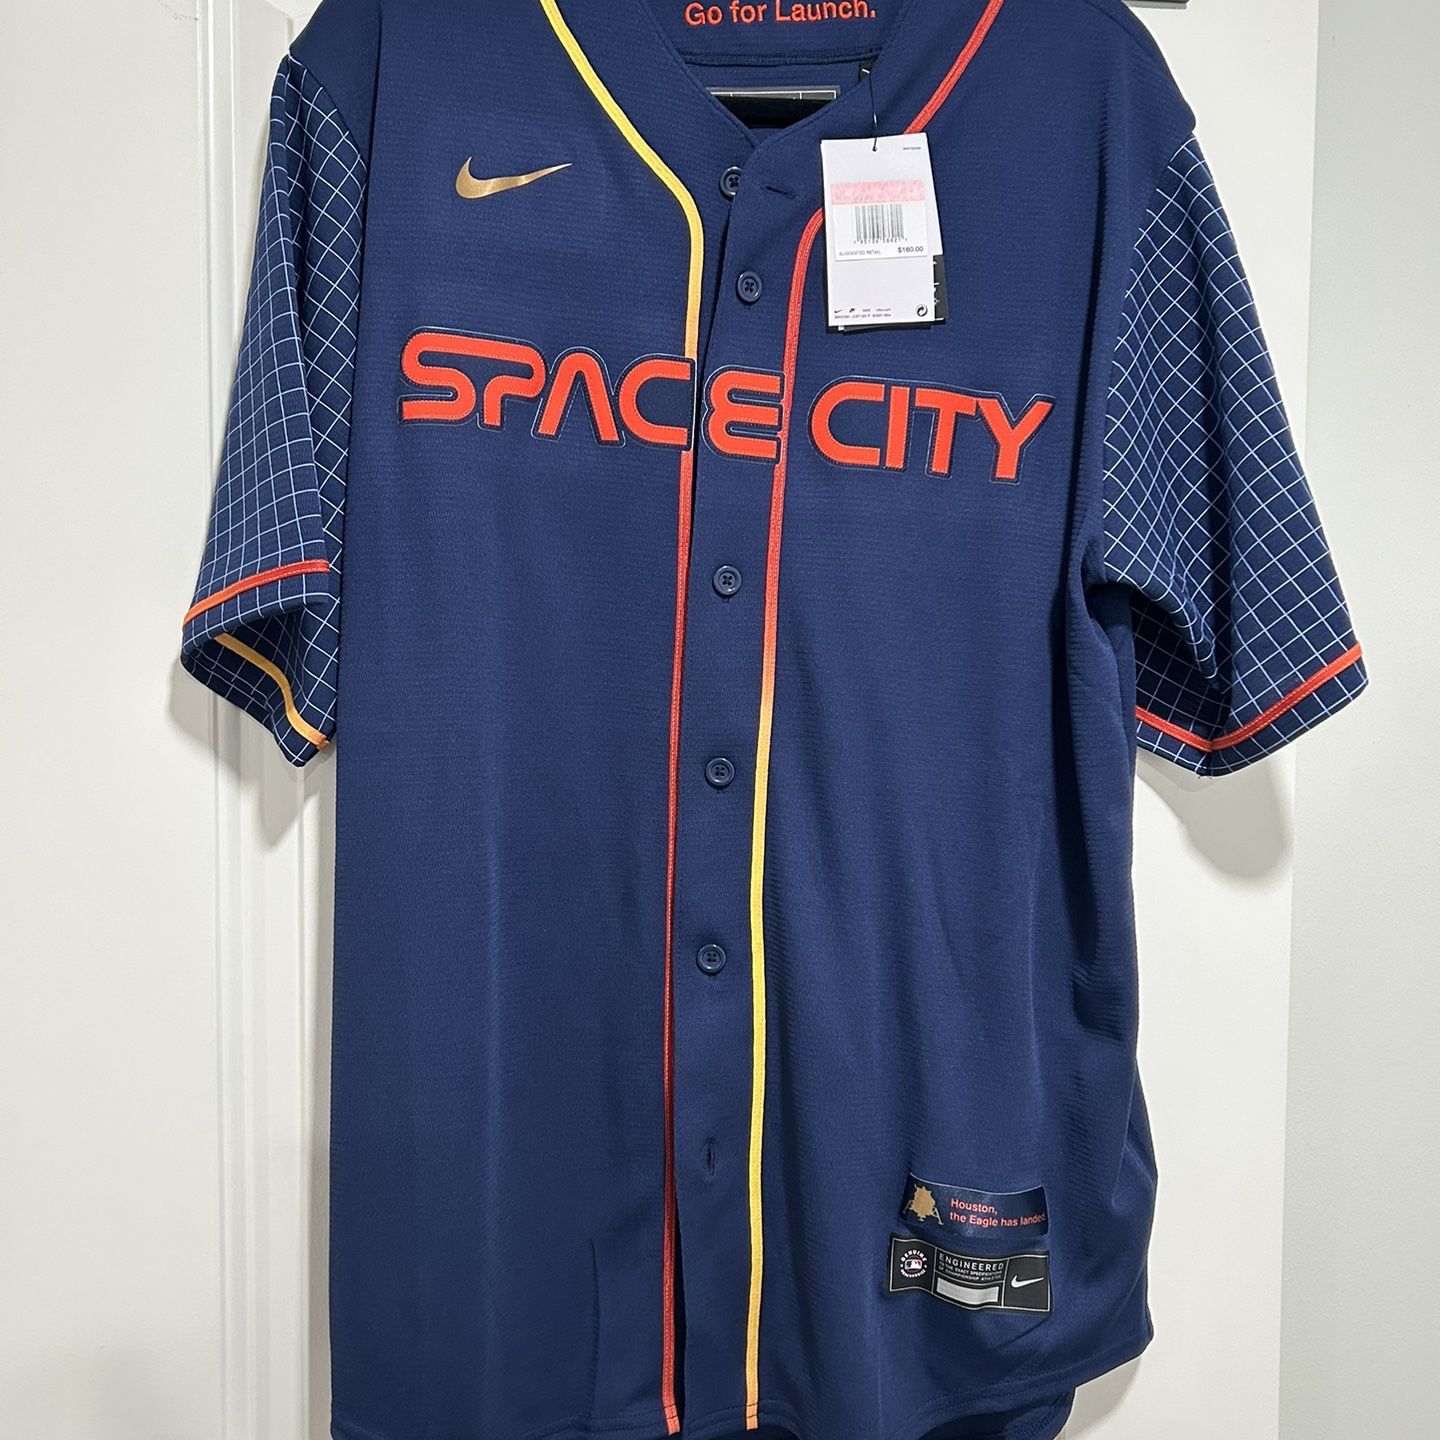 Looking For: 1994-1999 Astros Jersey in Humble, Texas for 2023